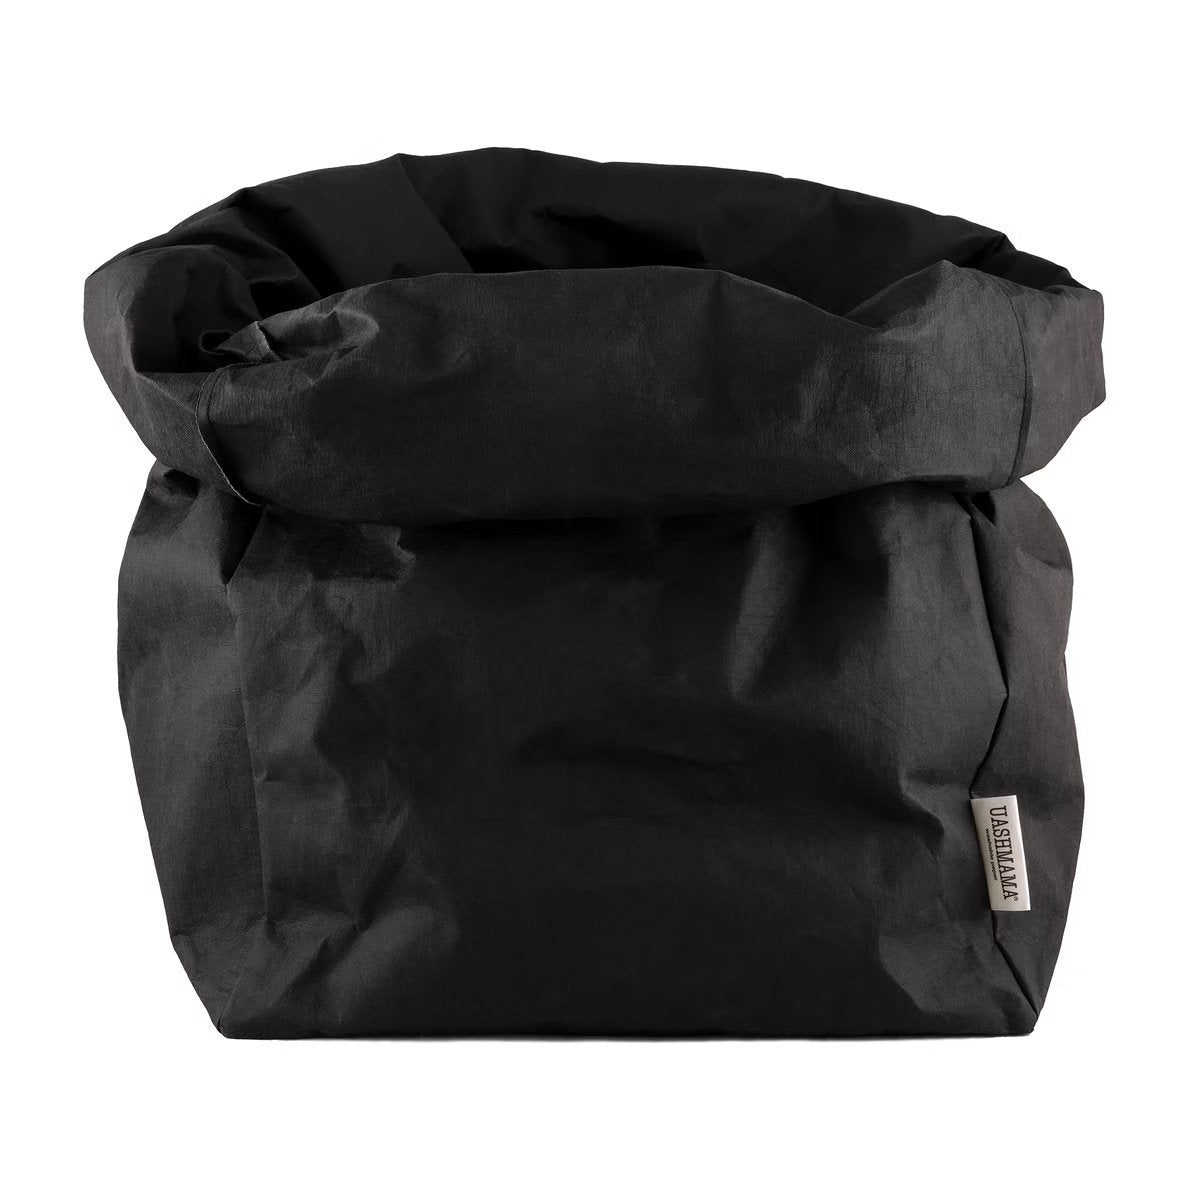 A washable paper bag is shown. The bag is rolled down at the top and features a UASHMAMA logo label on the bottom left corner. The bag pictured is the gigantic size in black.